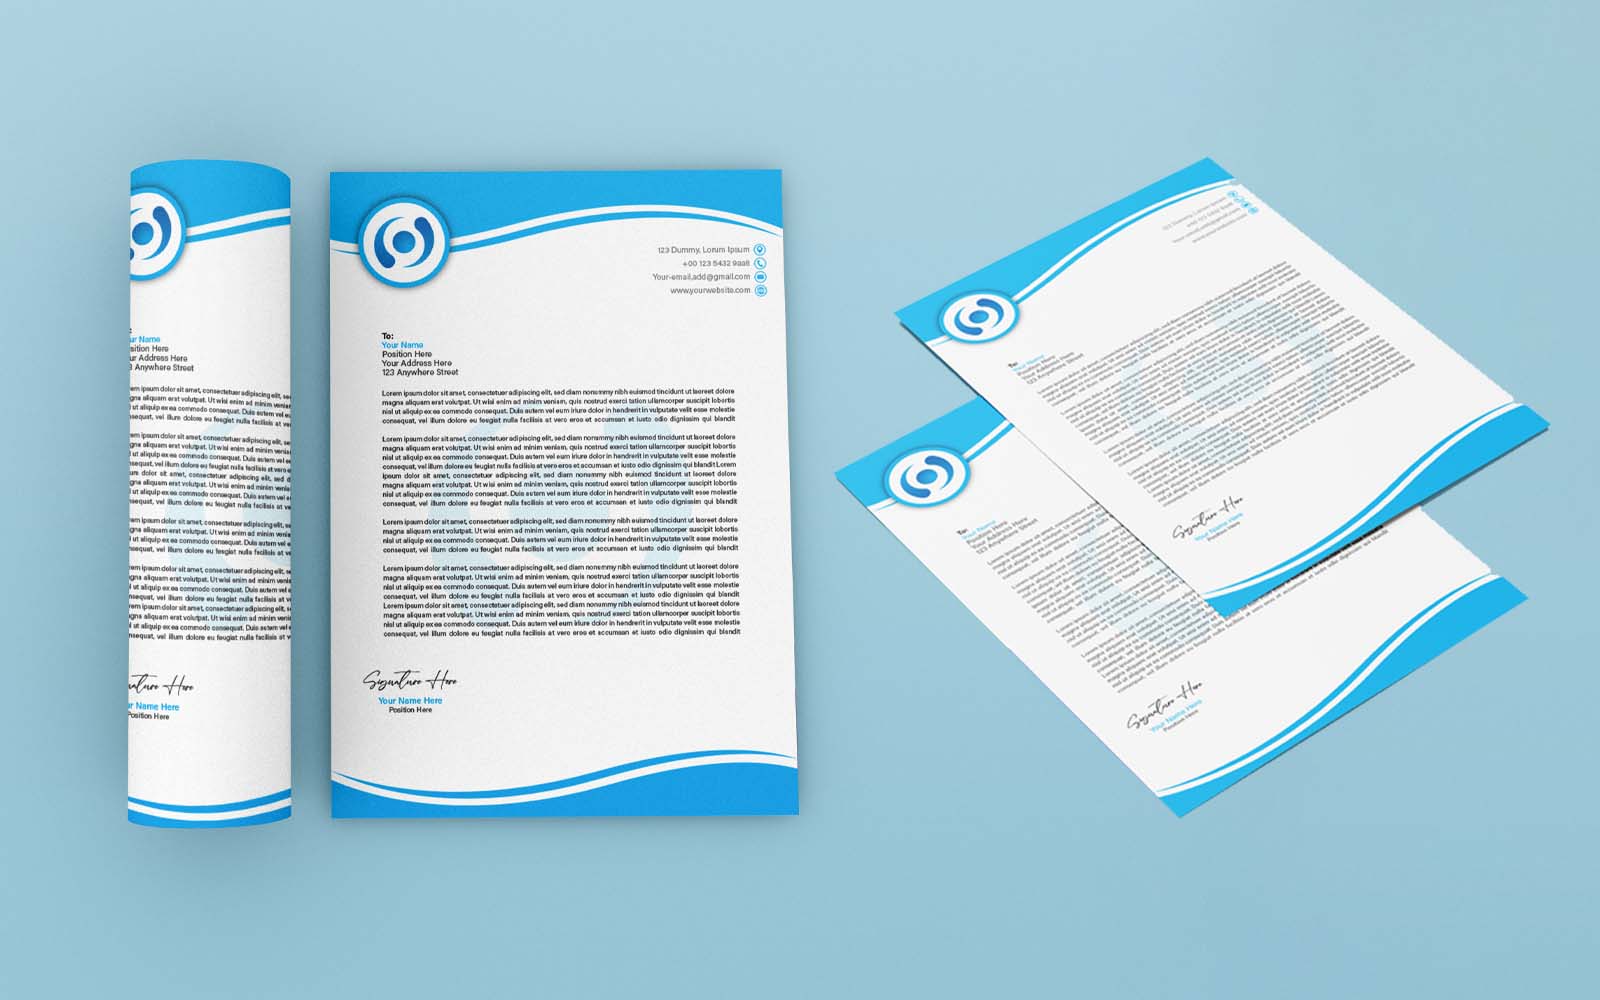 Template #301520 Identity Professional Webdesign Template - Logo template Preview